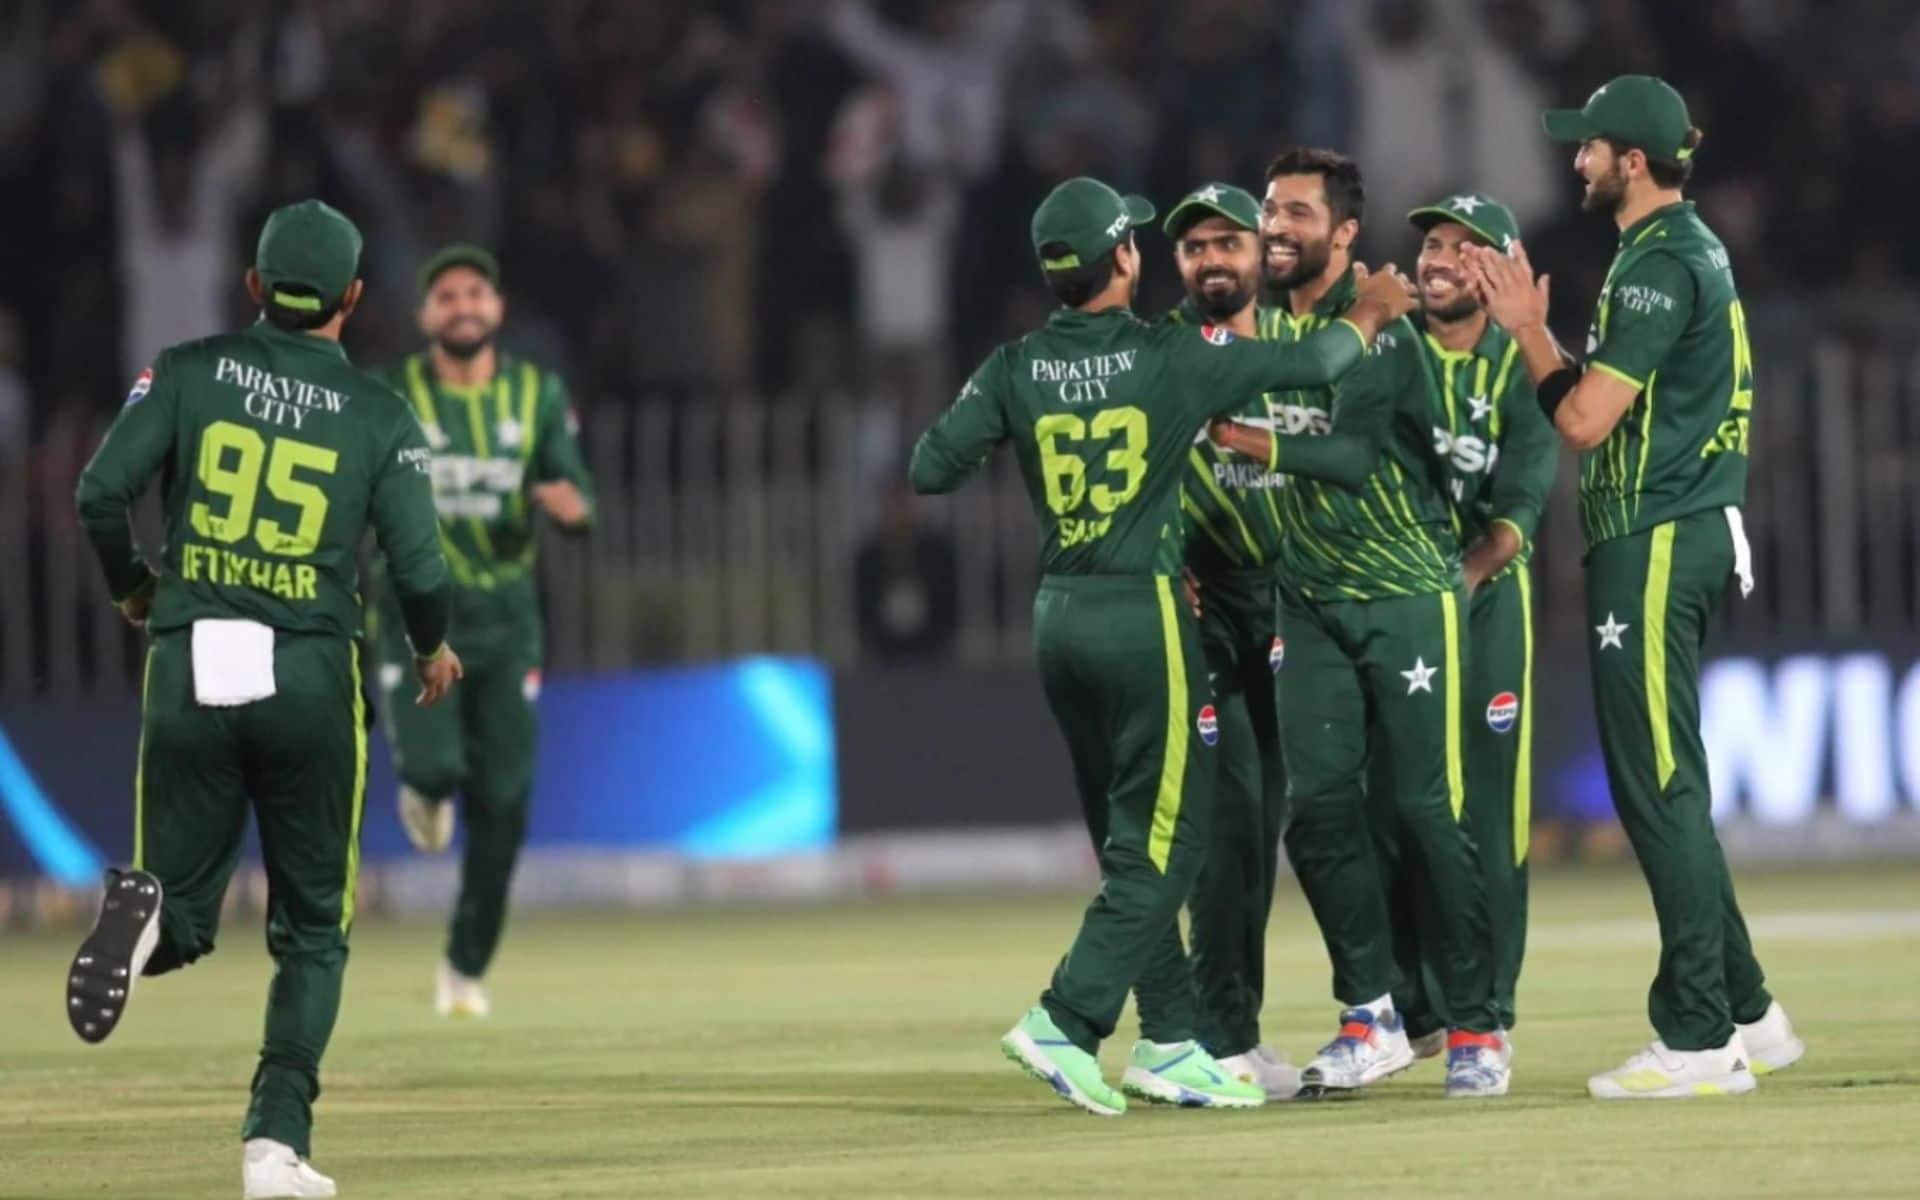 Pakistan recently faced New Zealand at home (PCB)